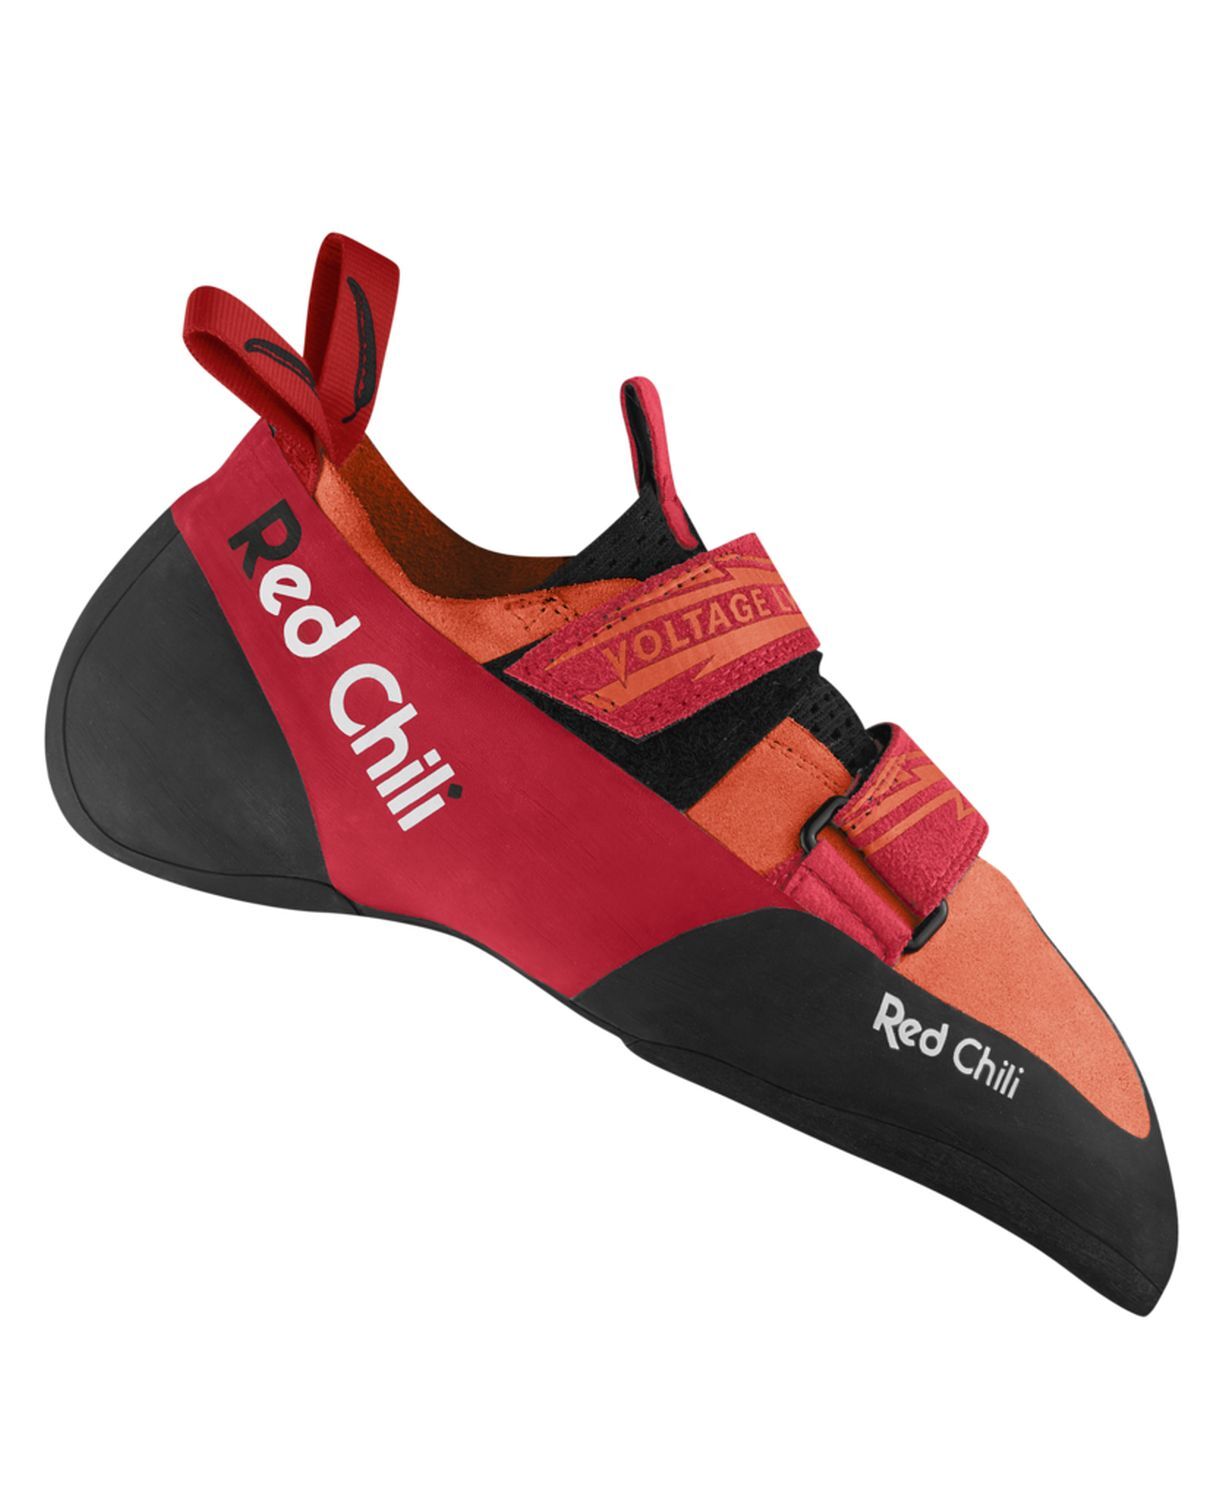  Red Chili Voltage II Climbing Shoe - Red 7.5